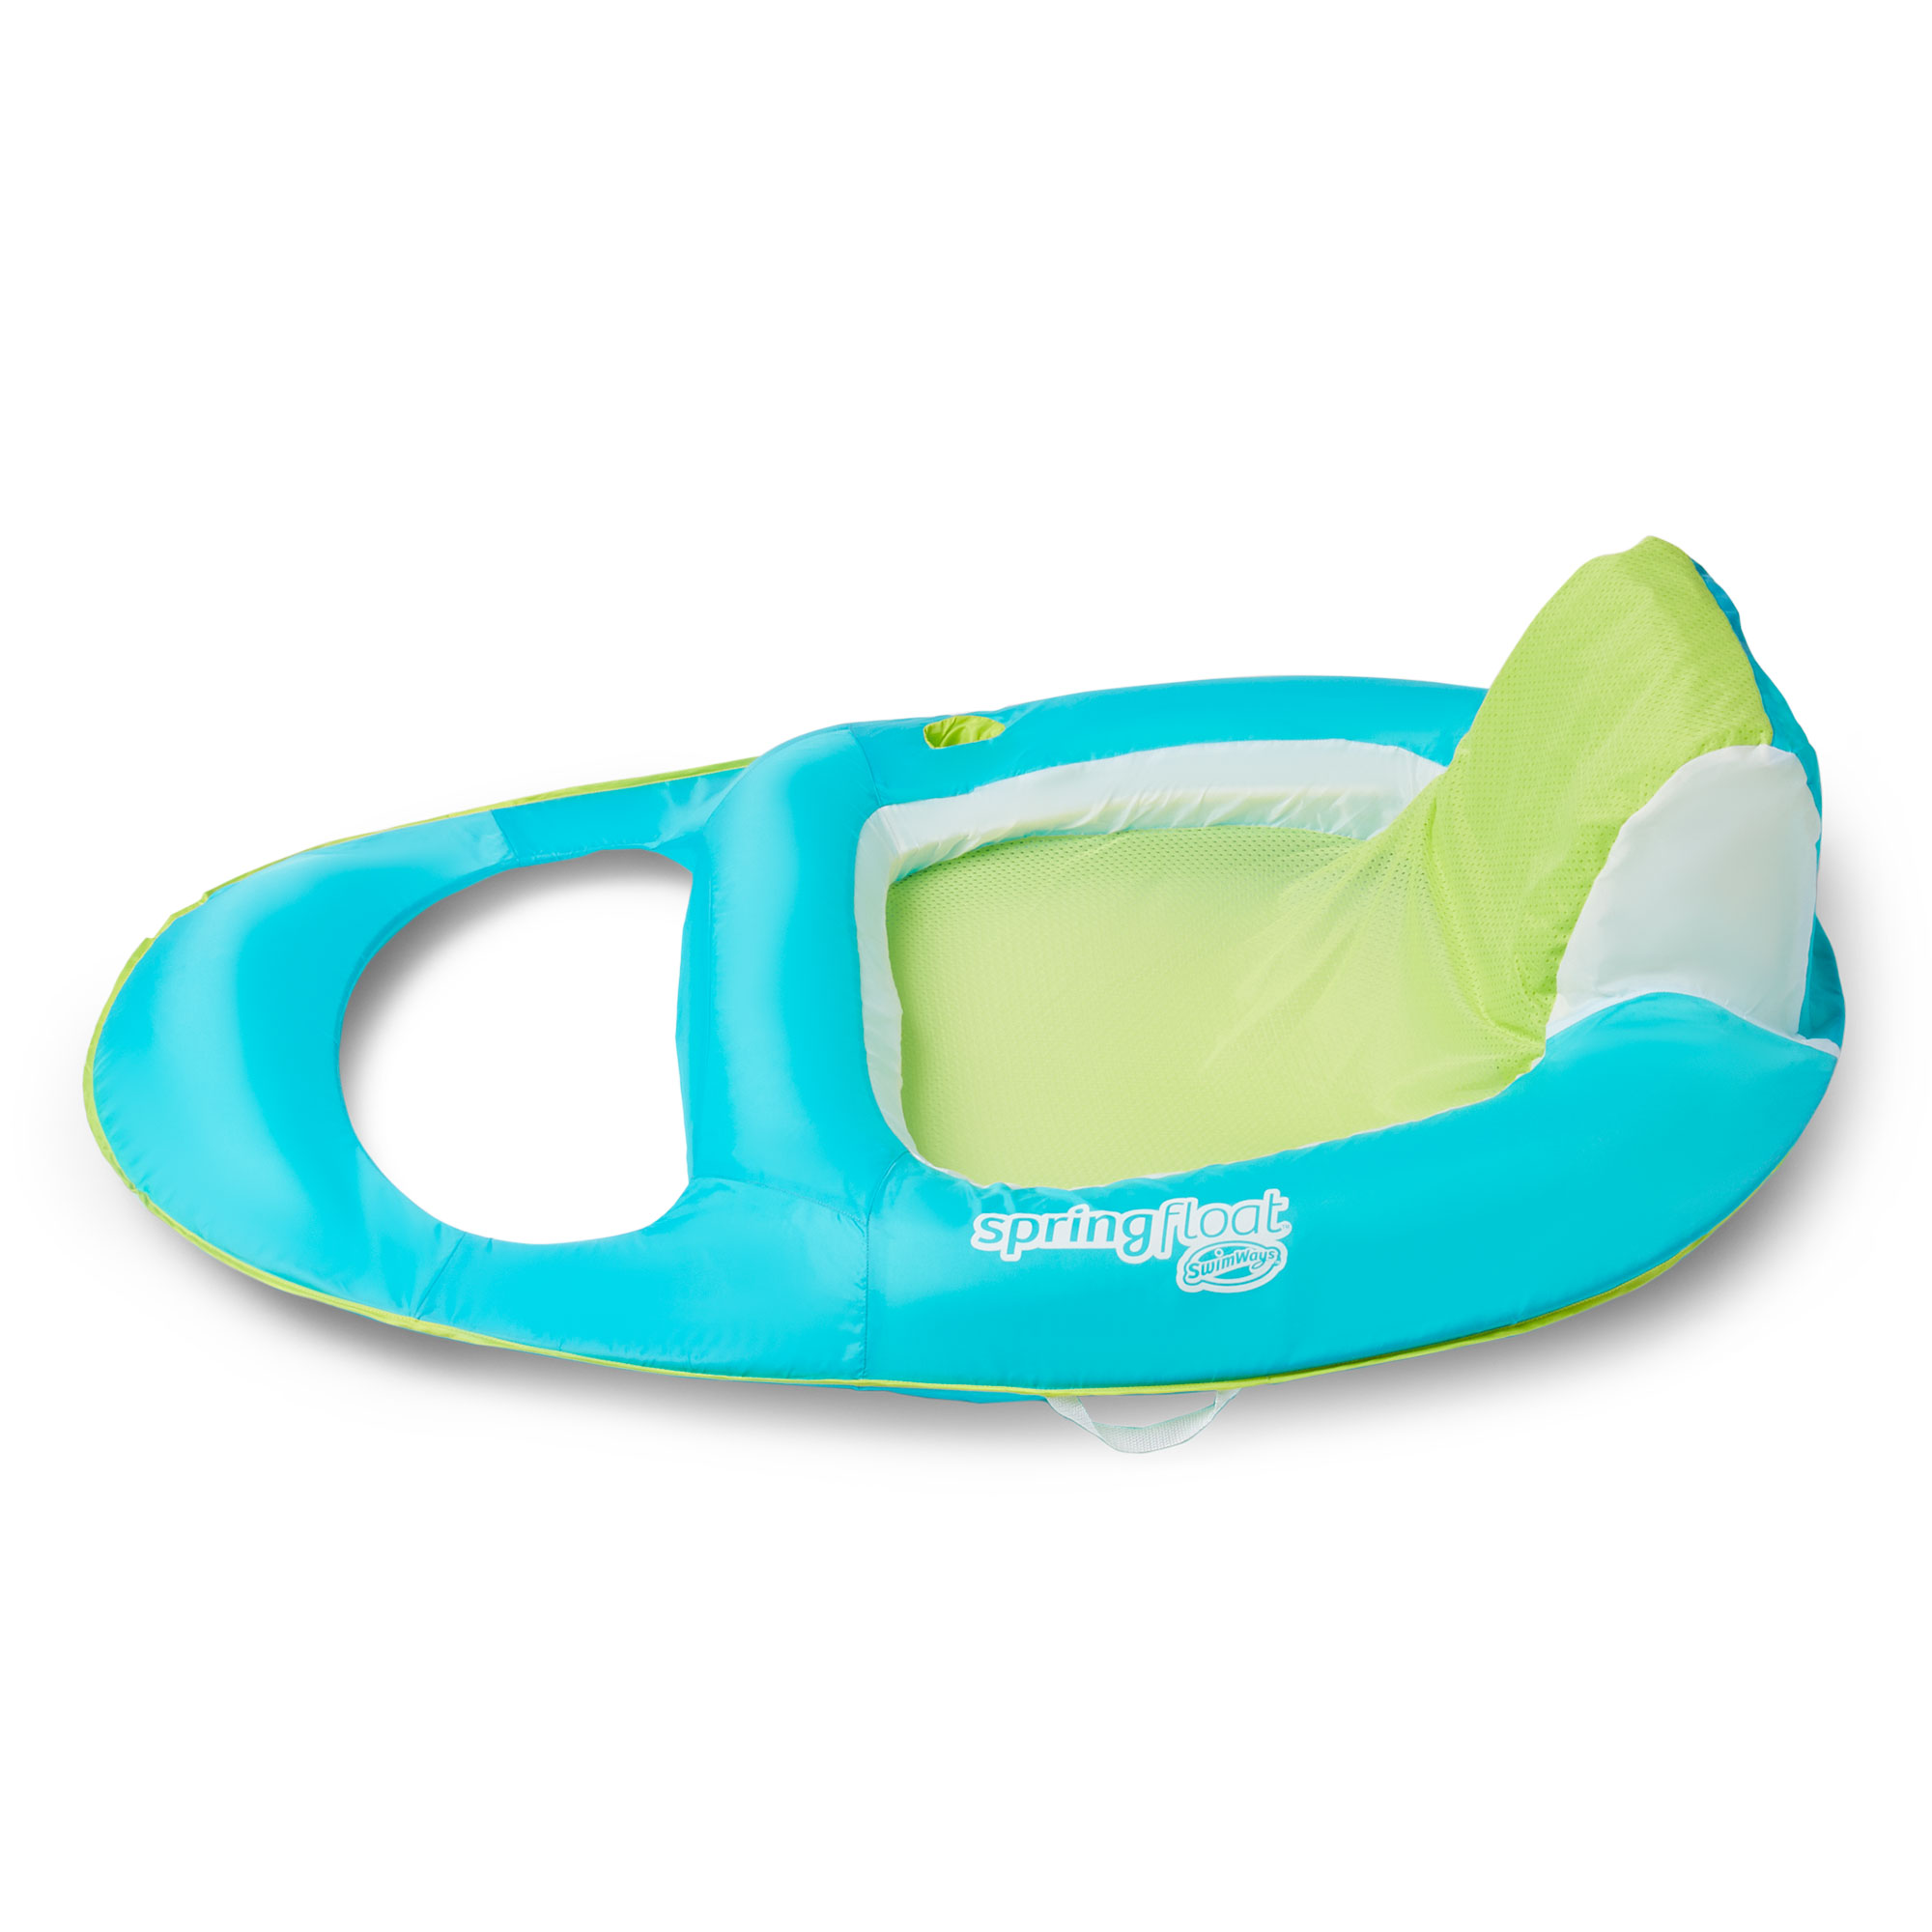 SwimWays Spring Float Swimming Pool Lounger Chaise Inflatable Floating Chair w/Cup Holder, Aqua & Lime - image 3 of 9